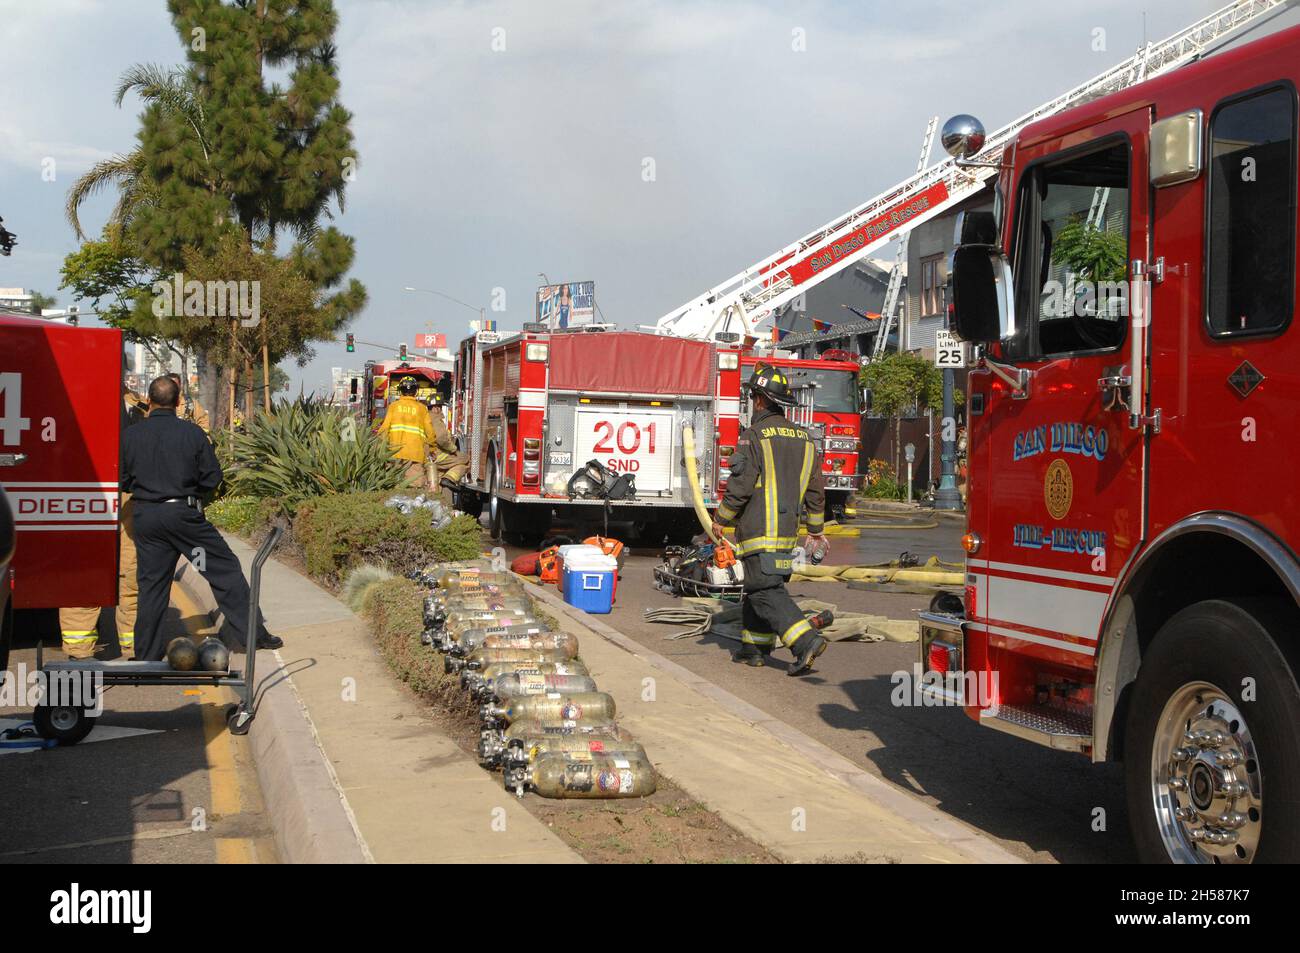 Air bottles are lined up for use during a structure fire in San Diego, California, under the control of San Diego Fire Rescue. Stock Photo